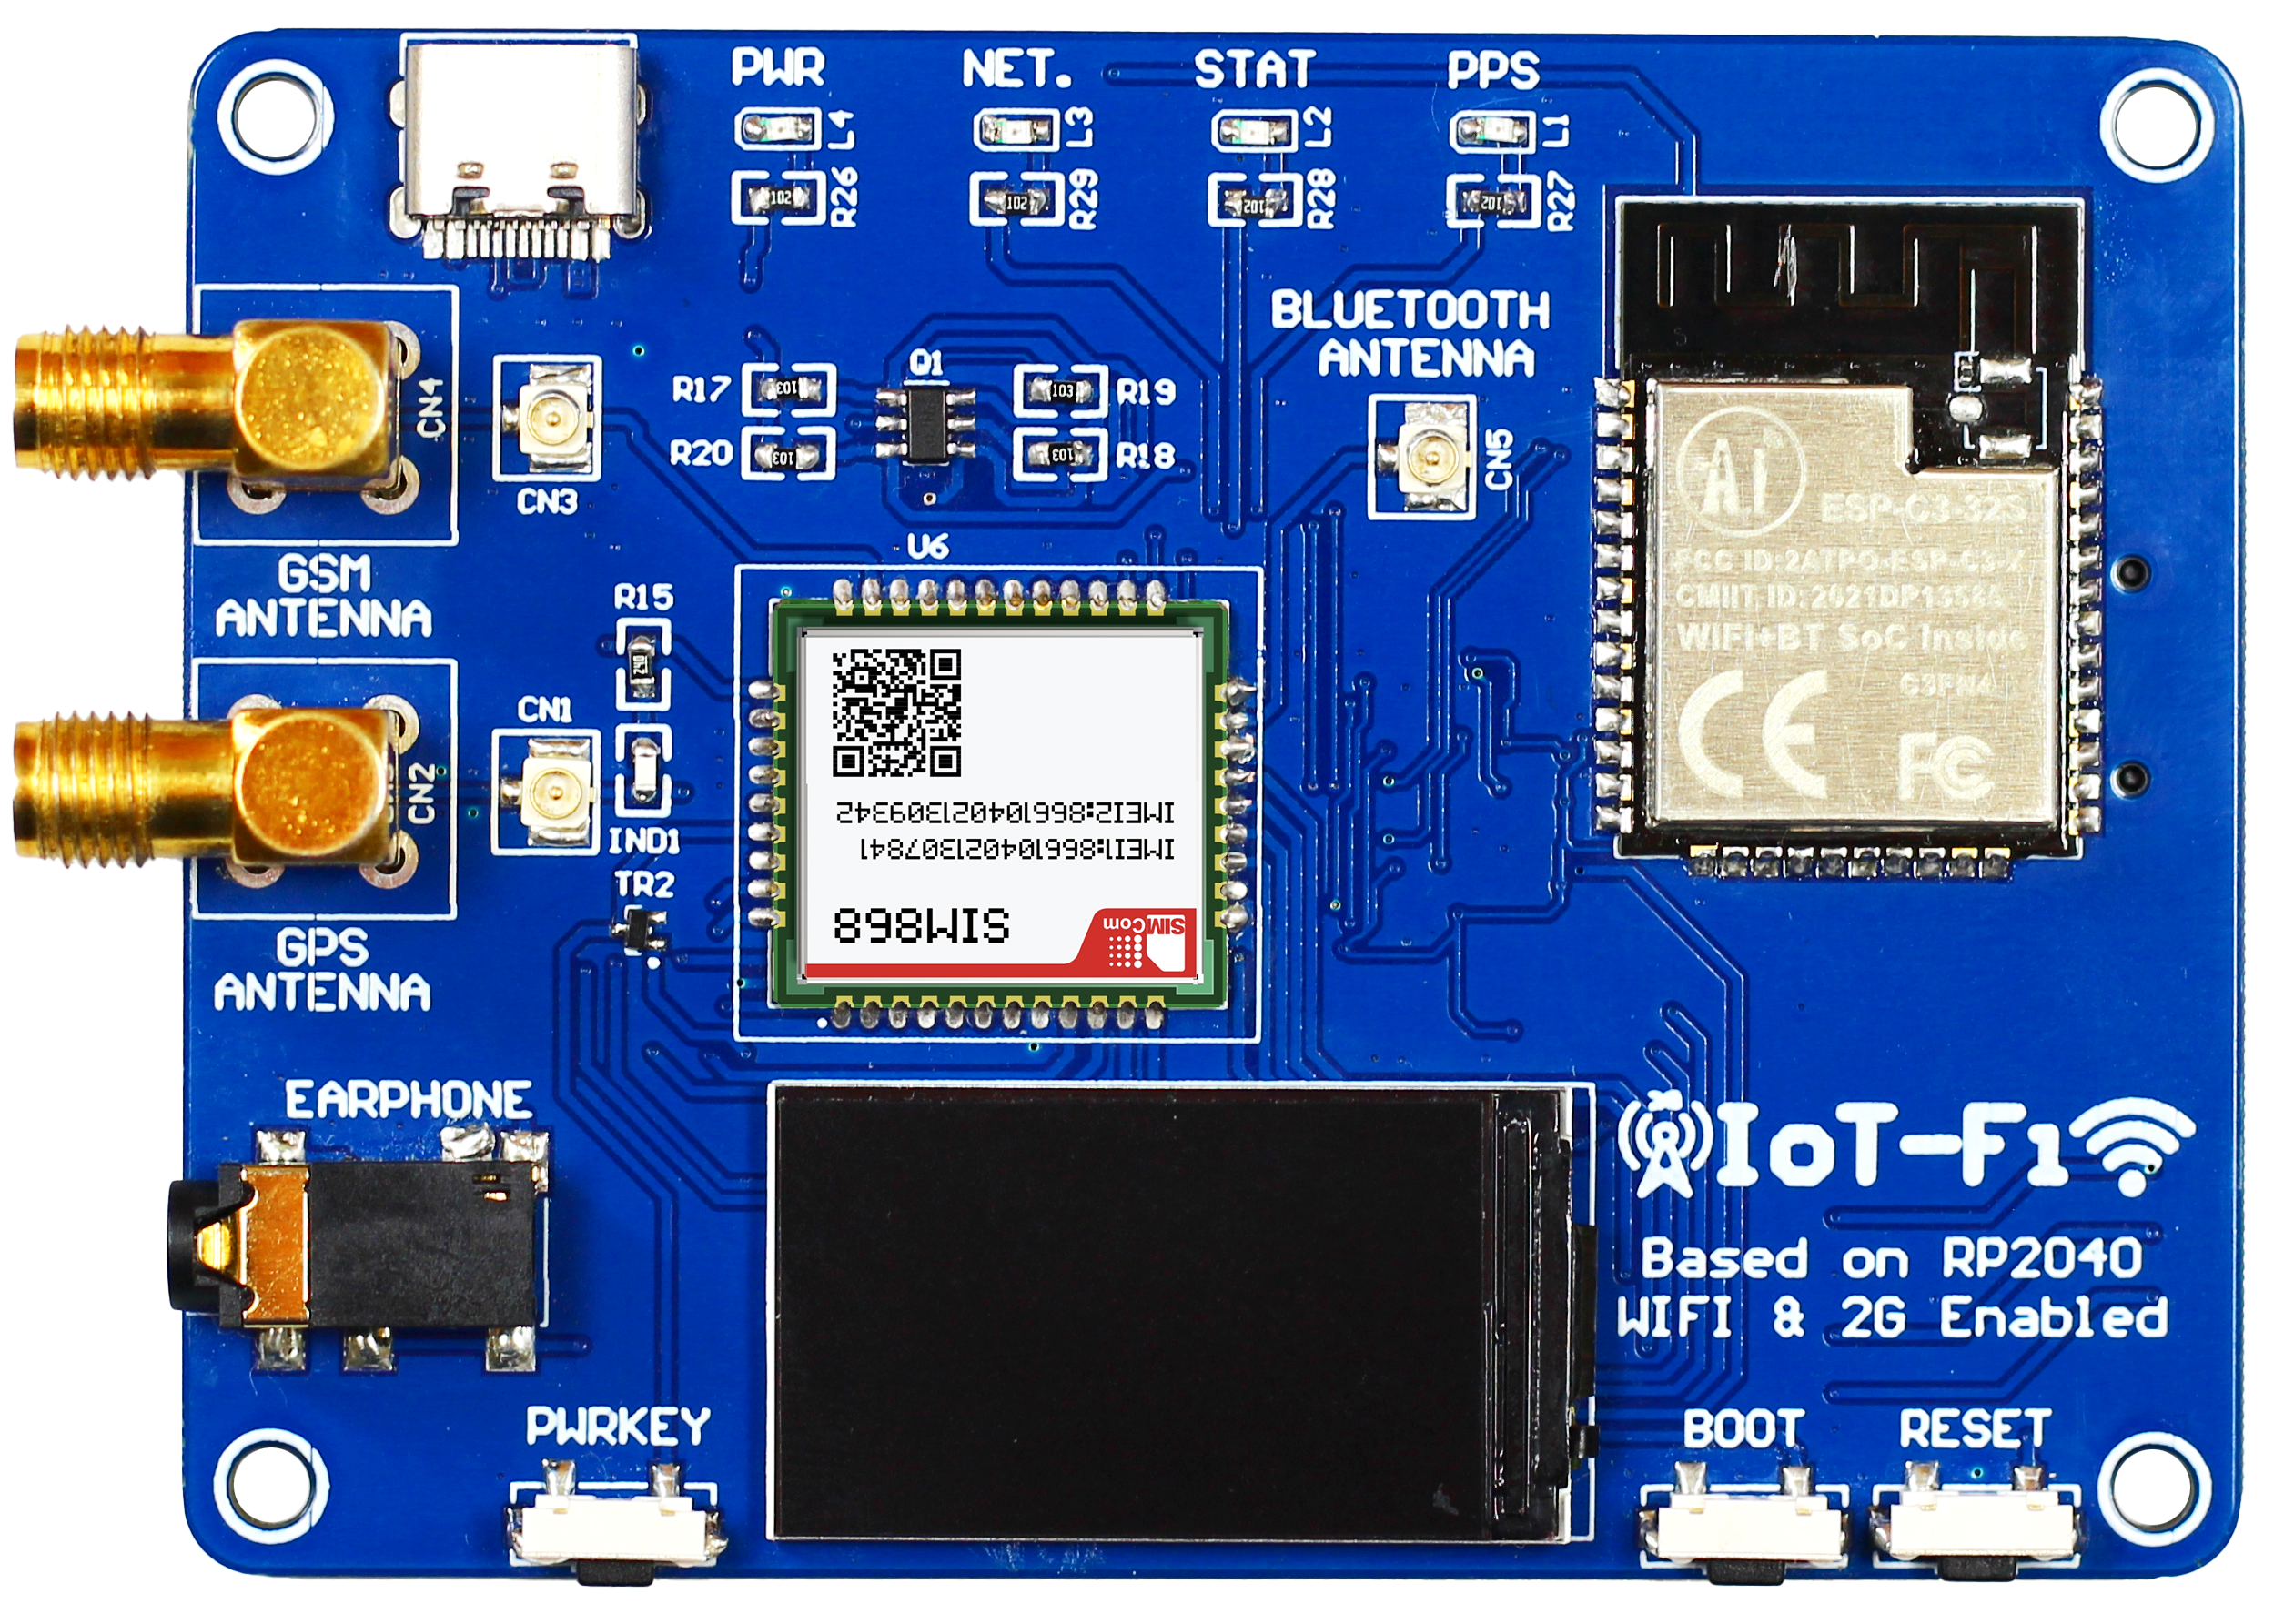 Raspberry Pi Powered IoTFi 2G / 4G DIY IoT Kit Launched by Arushi in Collab with SB Components